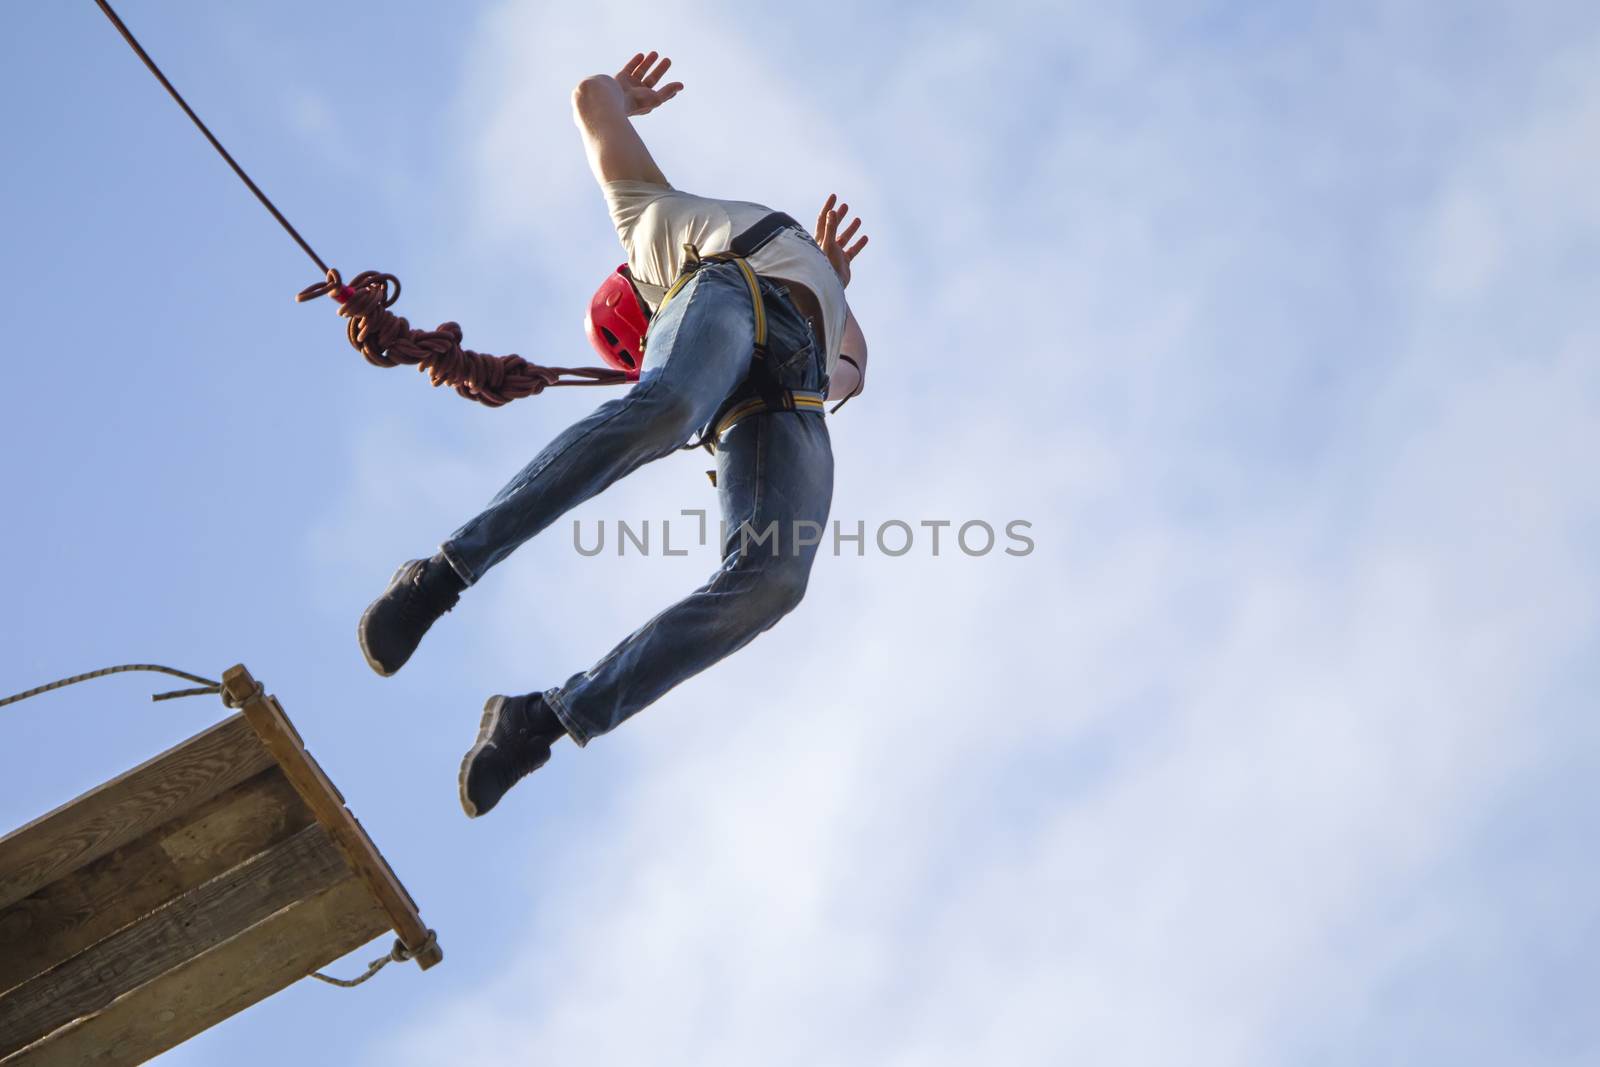 Jumping with a rope.Flight down on the rope.Engage in ropejumping.Dangerous hobbies